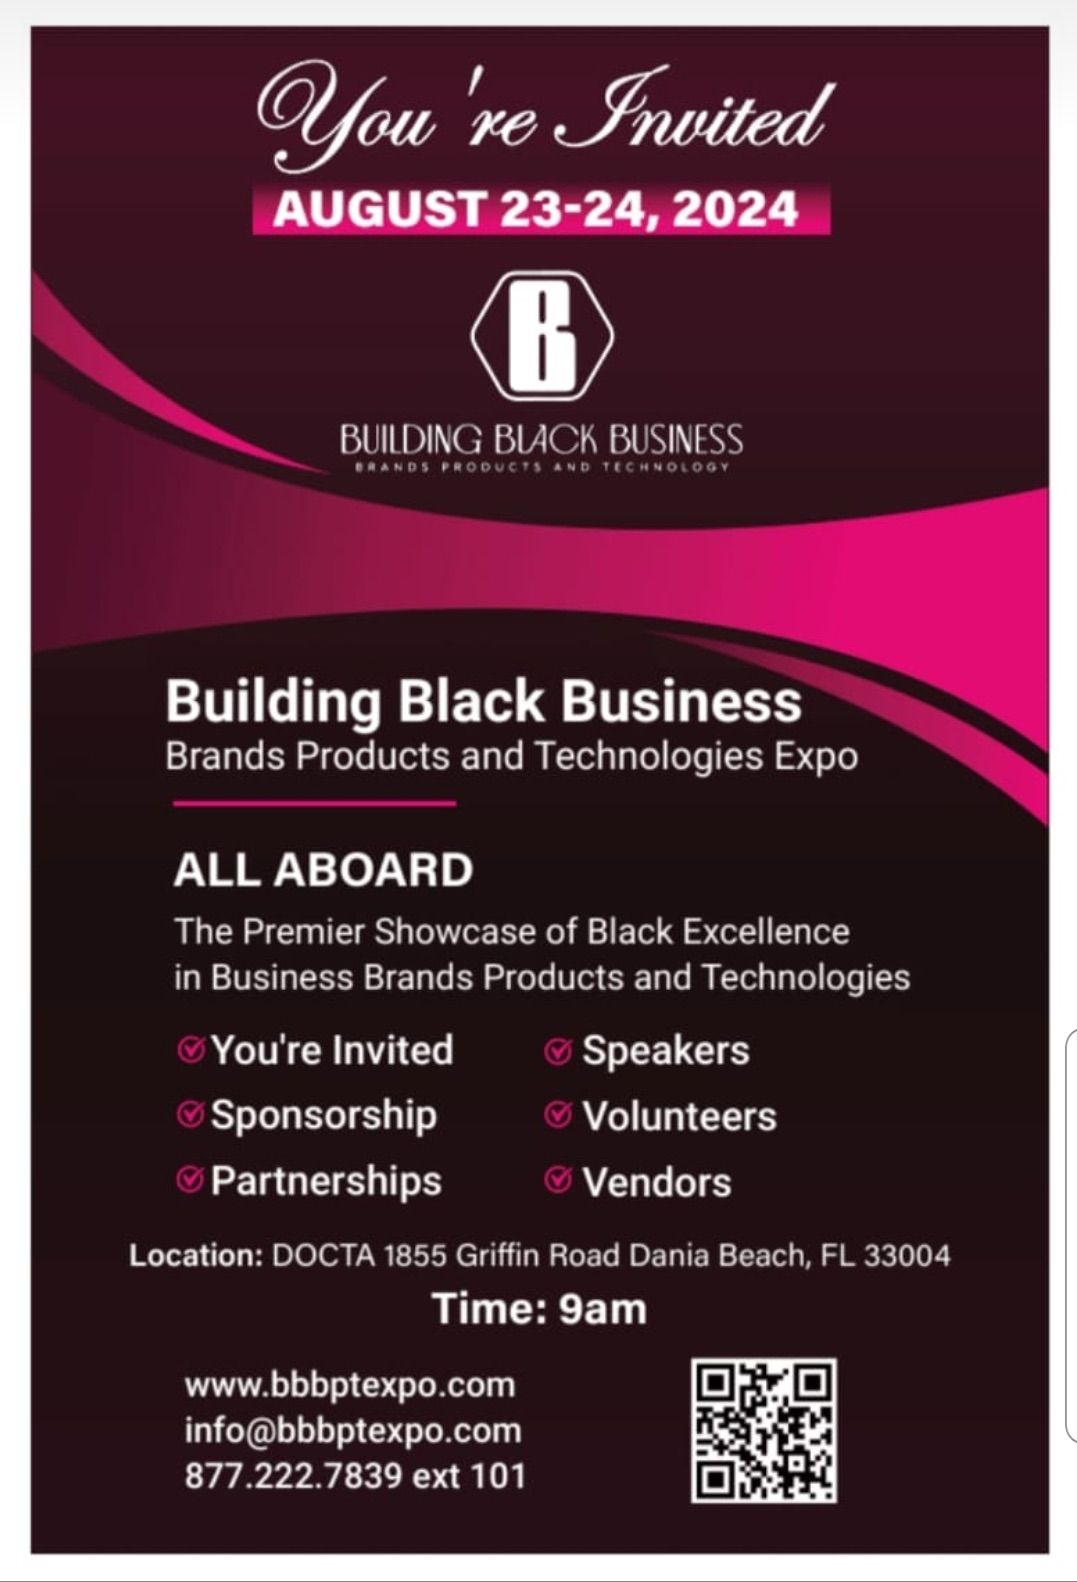 The BBBPT EXPO 